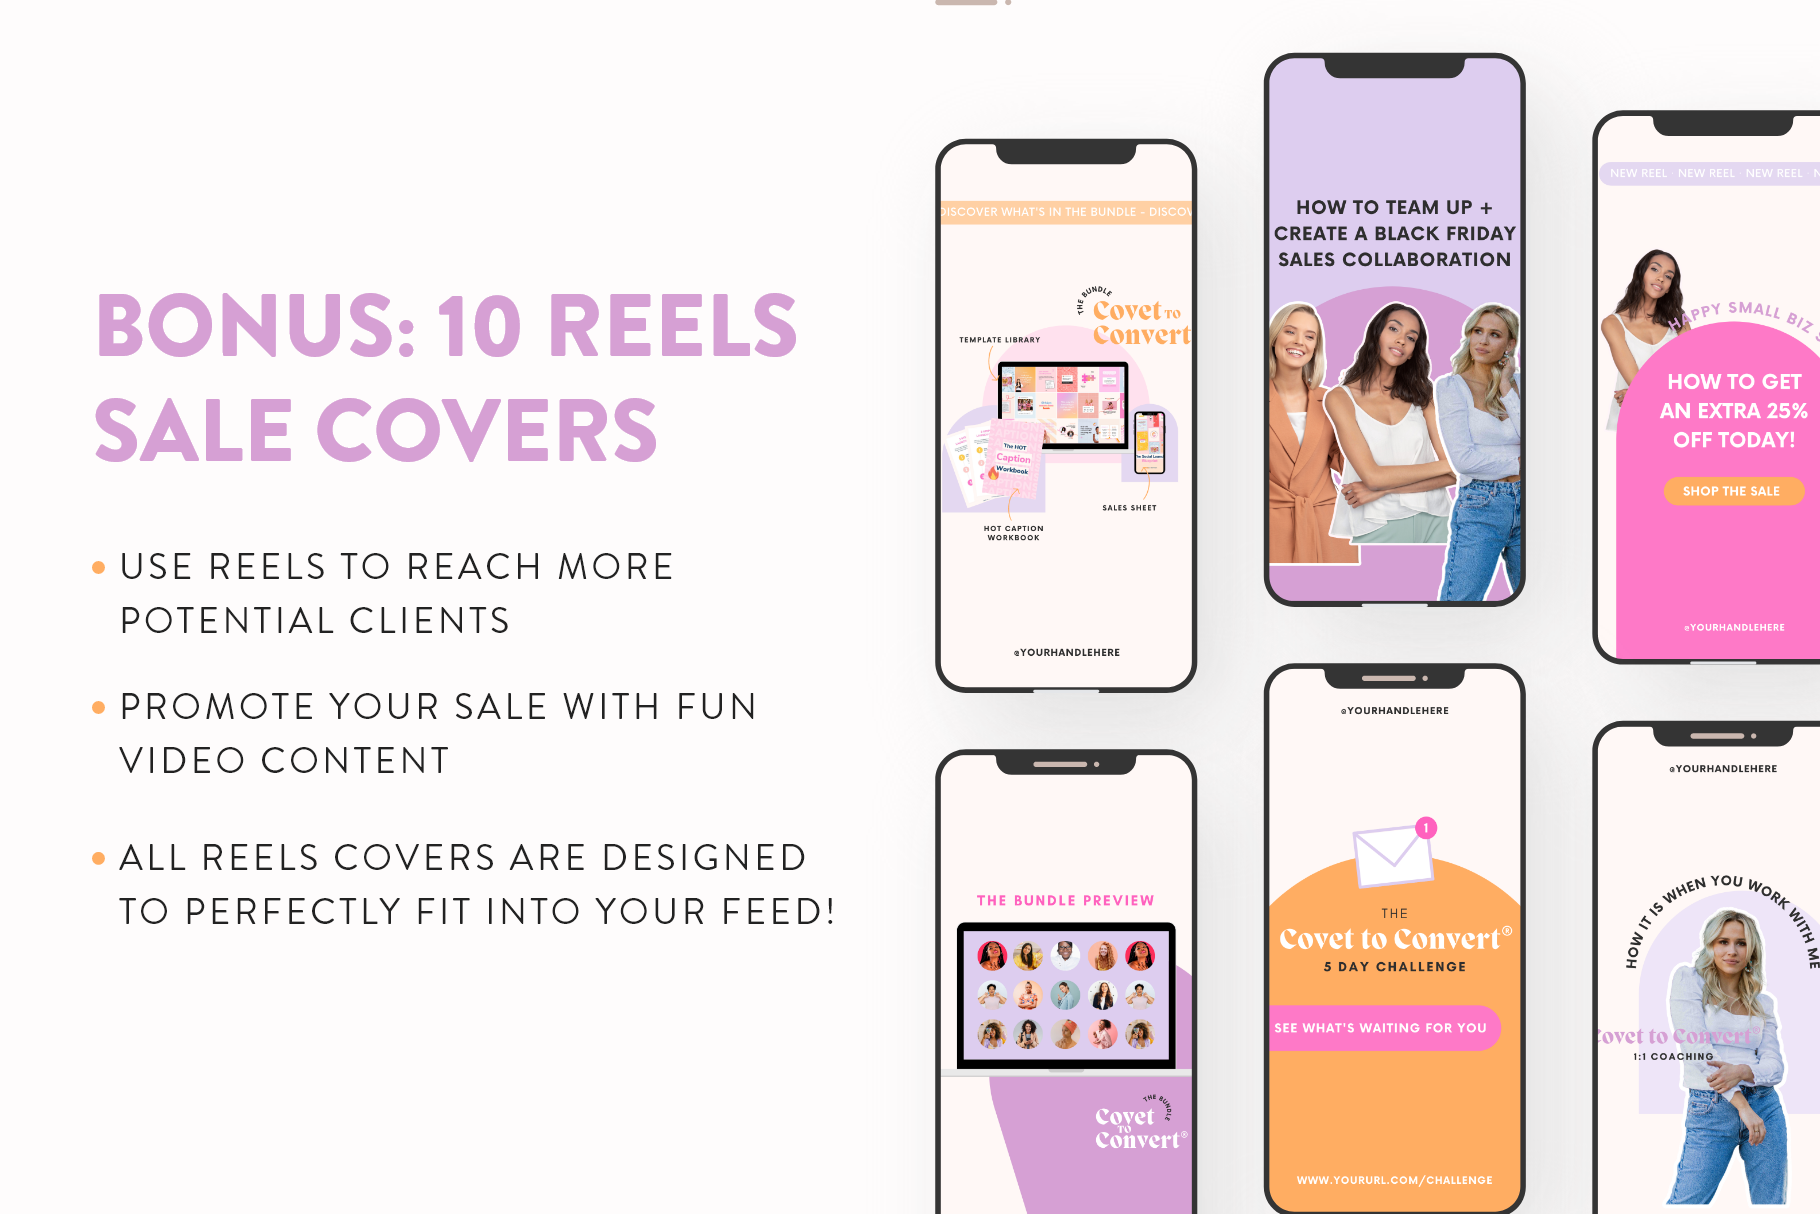 Sales-power-instagram-sales-templates-for-canva-reels-covers-8-CM